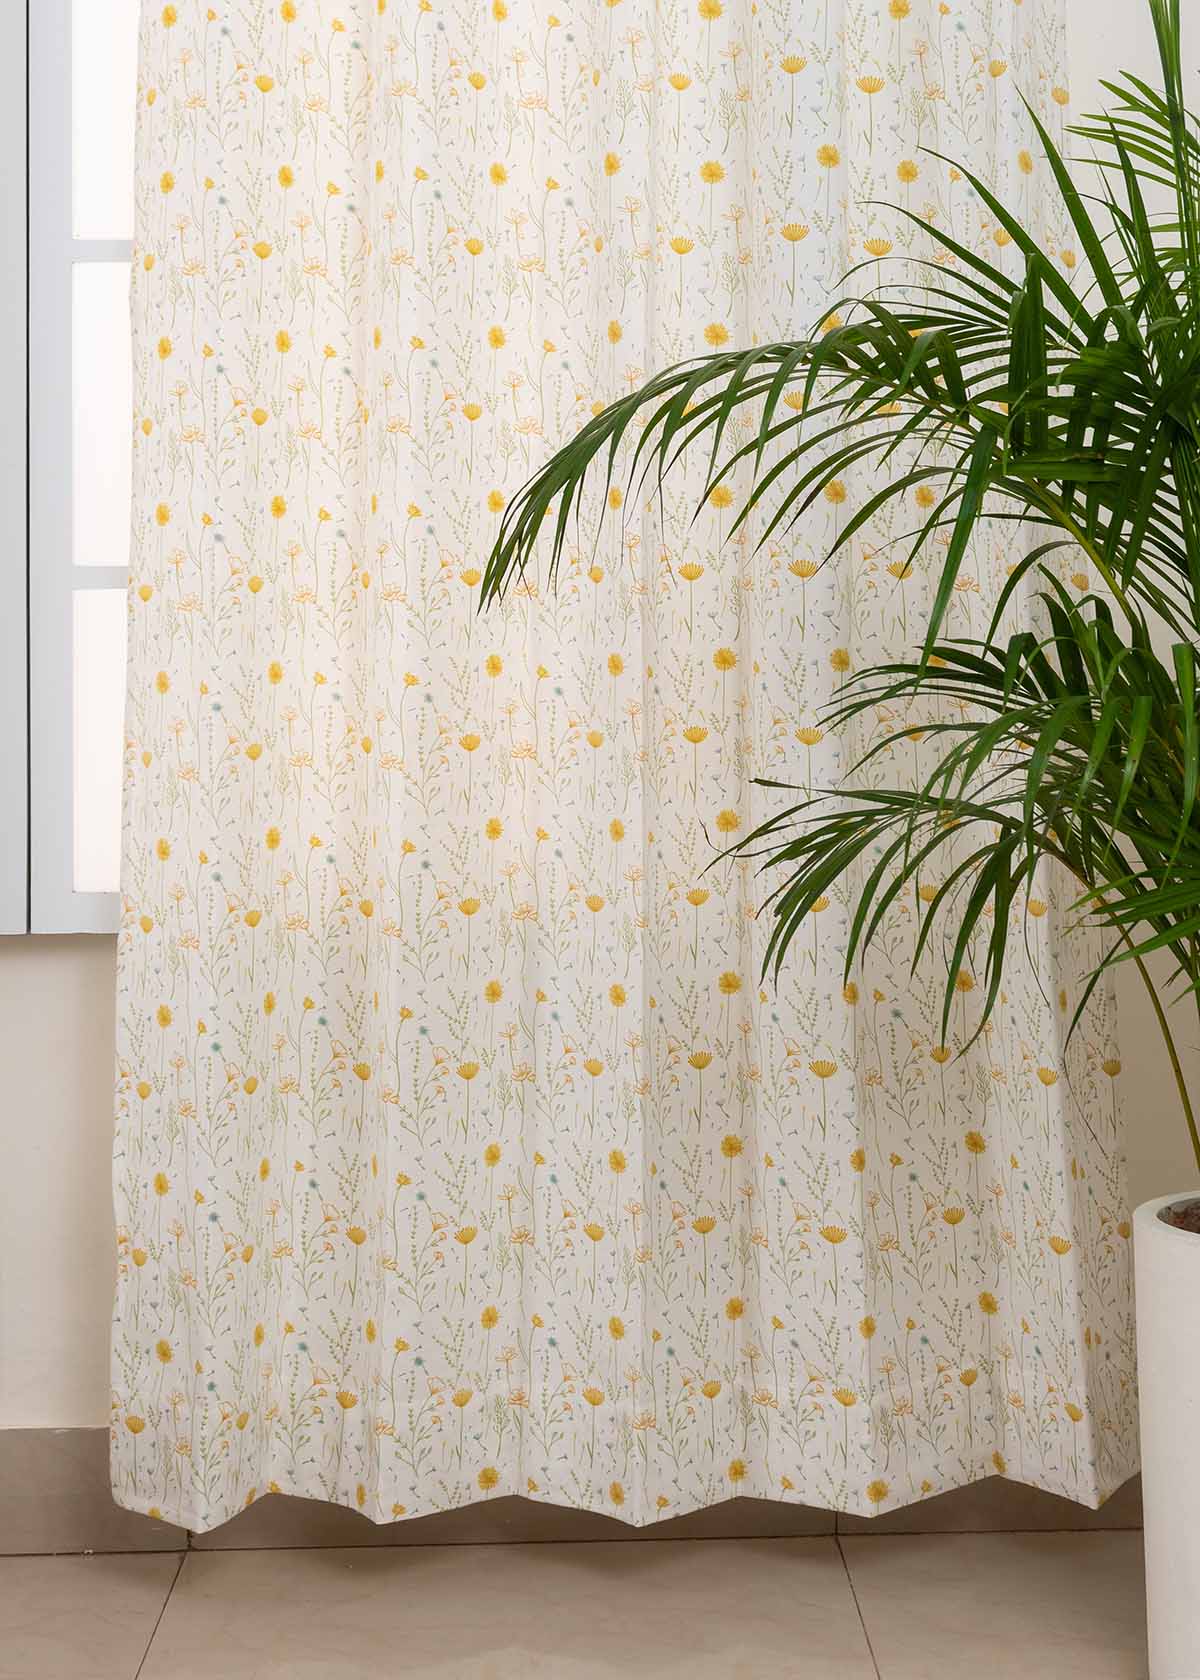 Drifting Dandelion 100% cotton floral curtain for kids room, living room - Room darkening - Yellow - Pack of 1